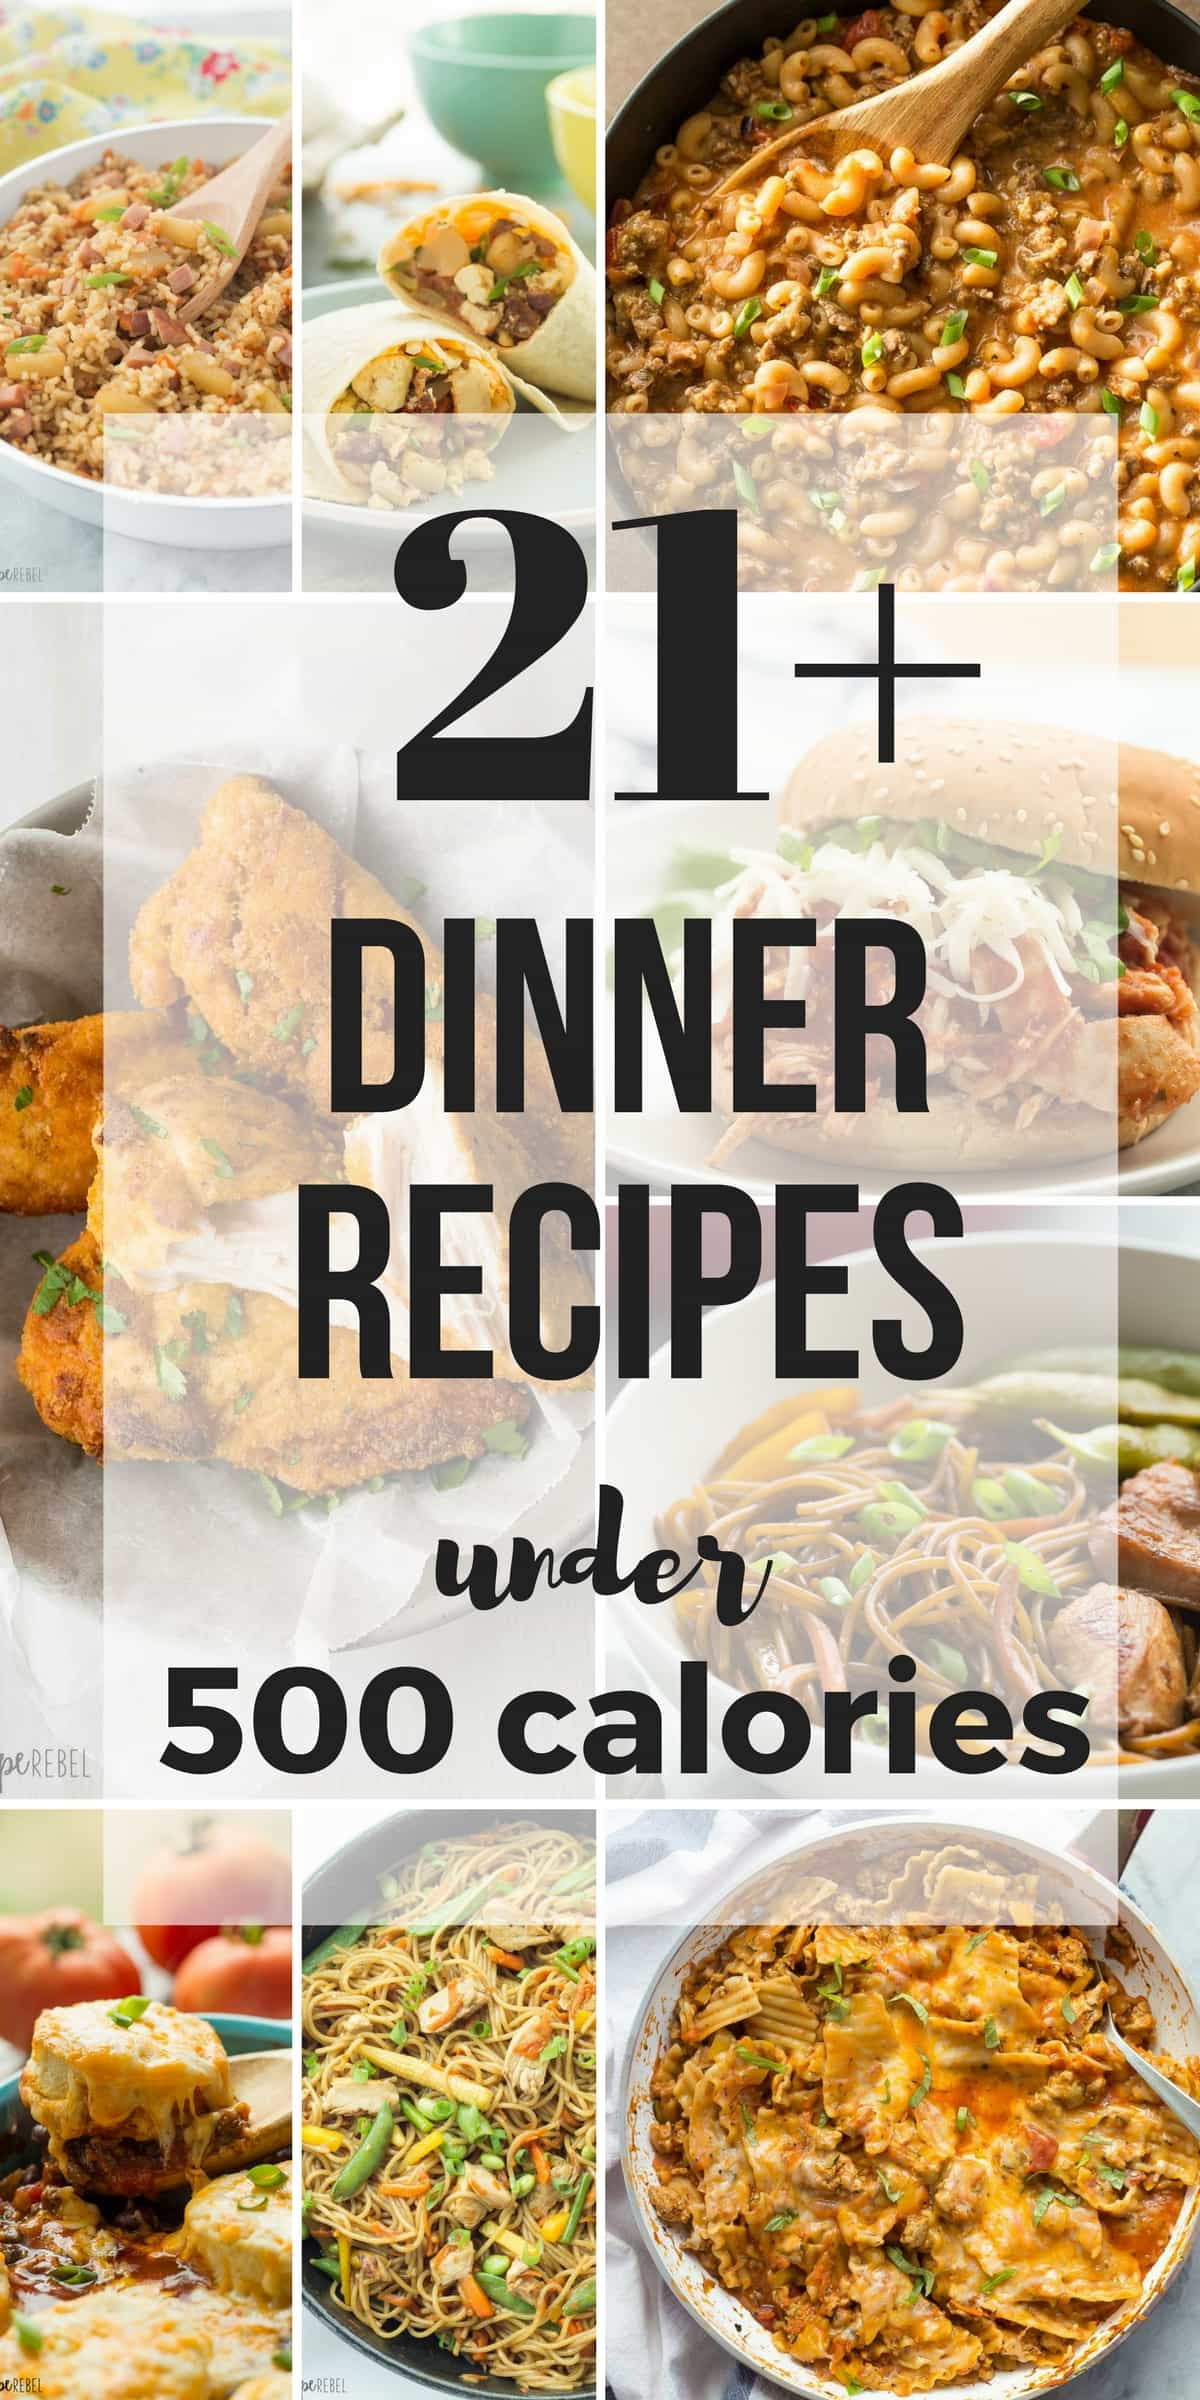 Low Calorie Dinners For Family
 21 Dinner Recipes Under 500 Calories